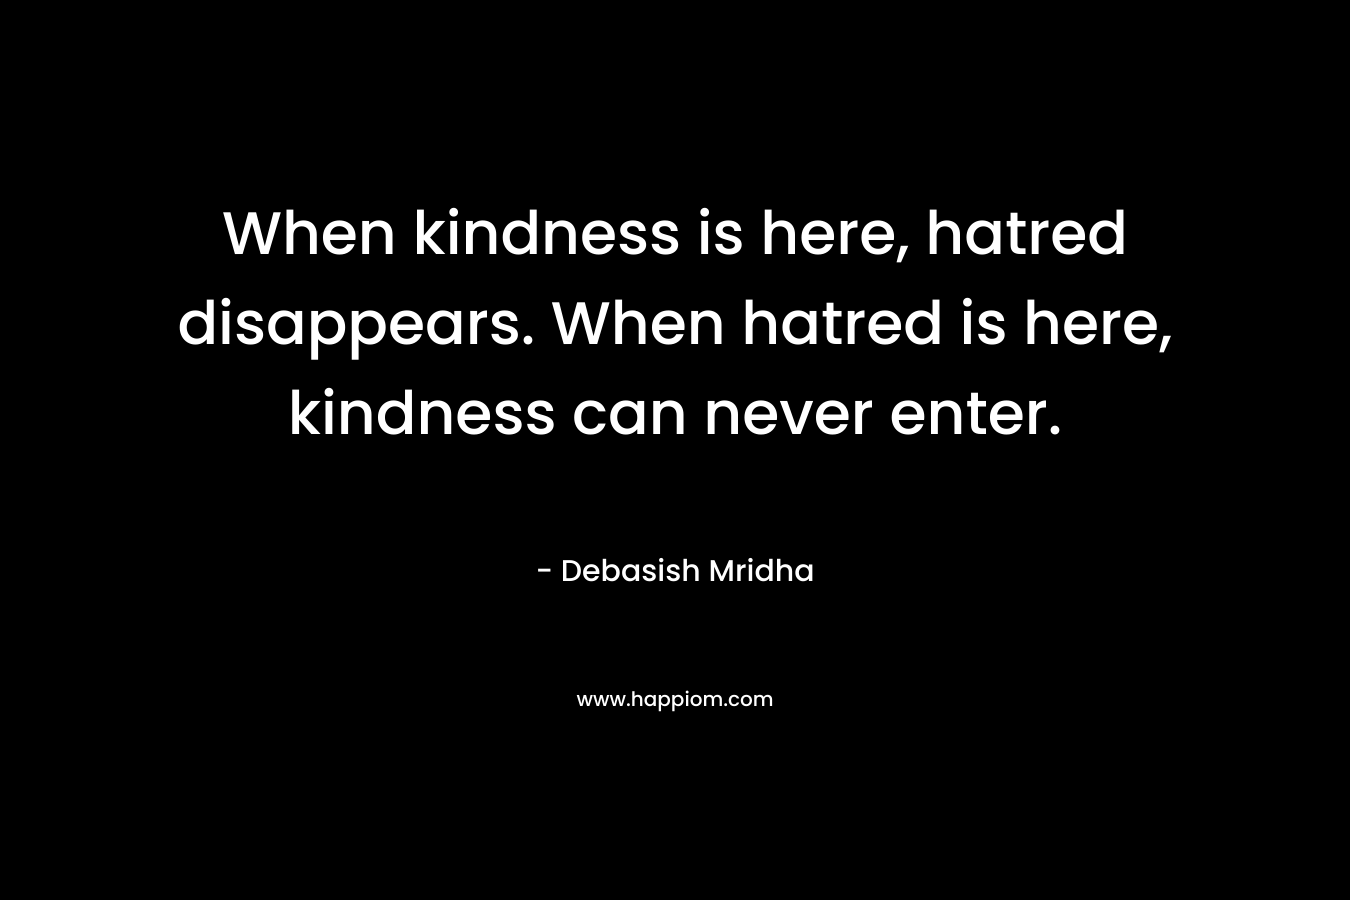 When kindness is here, hatred disappears. When hatred is here, kindness can never enter.